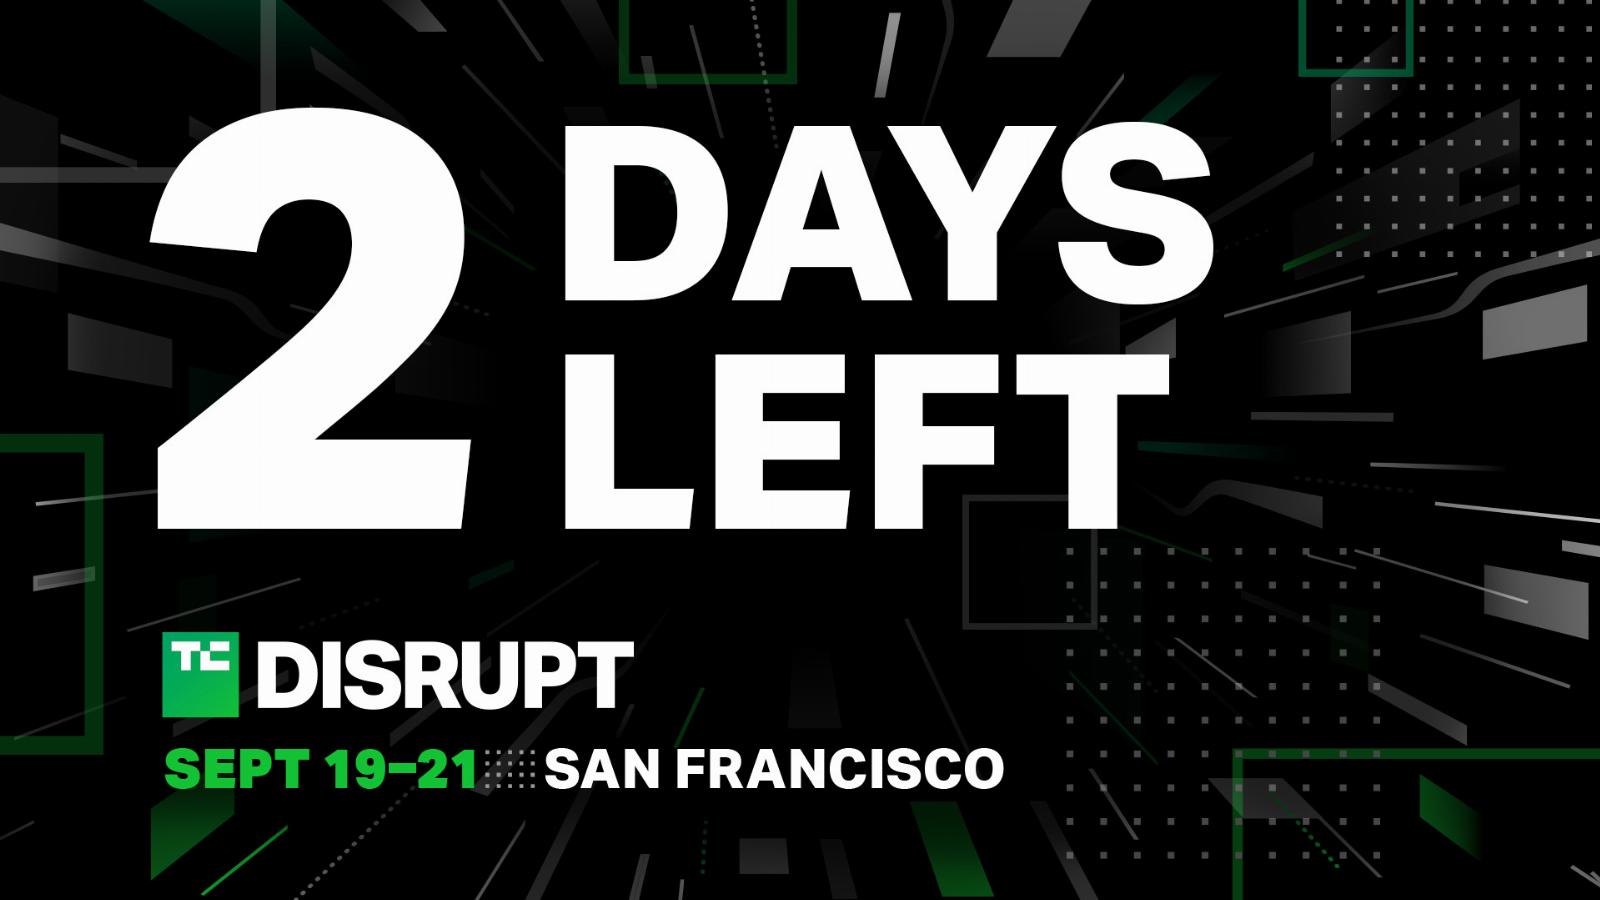 Just 48 hours left to save $1,000 on TC Disrupt passes